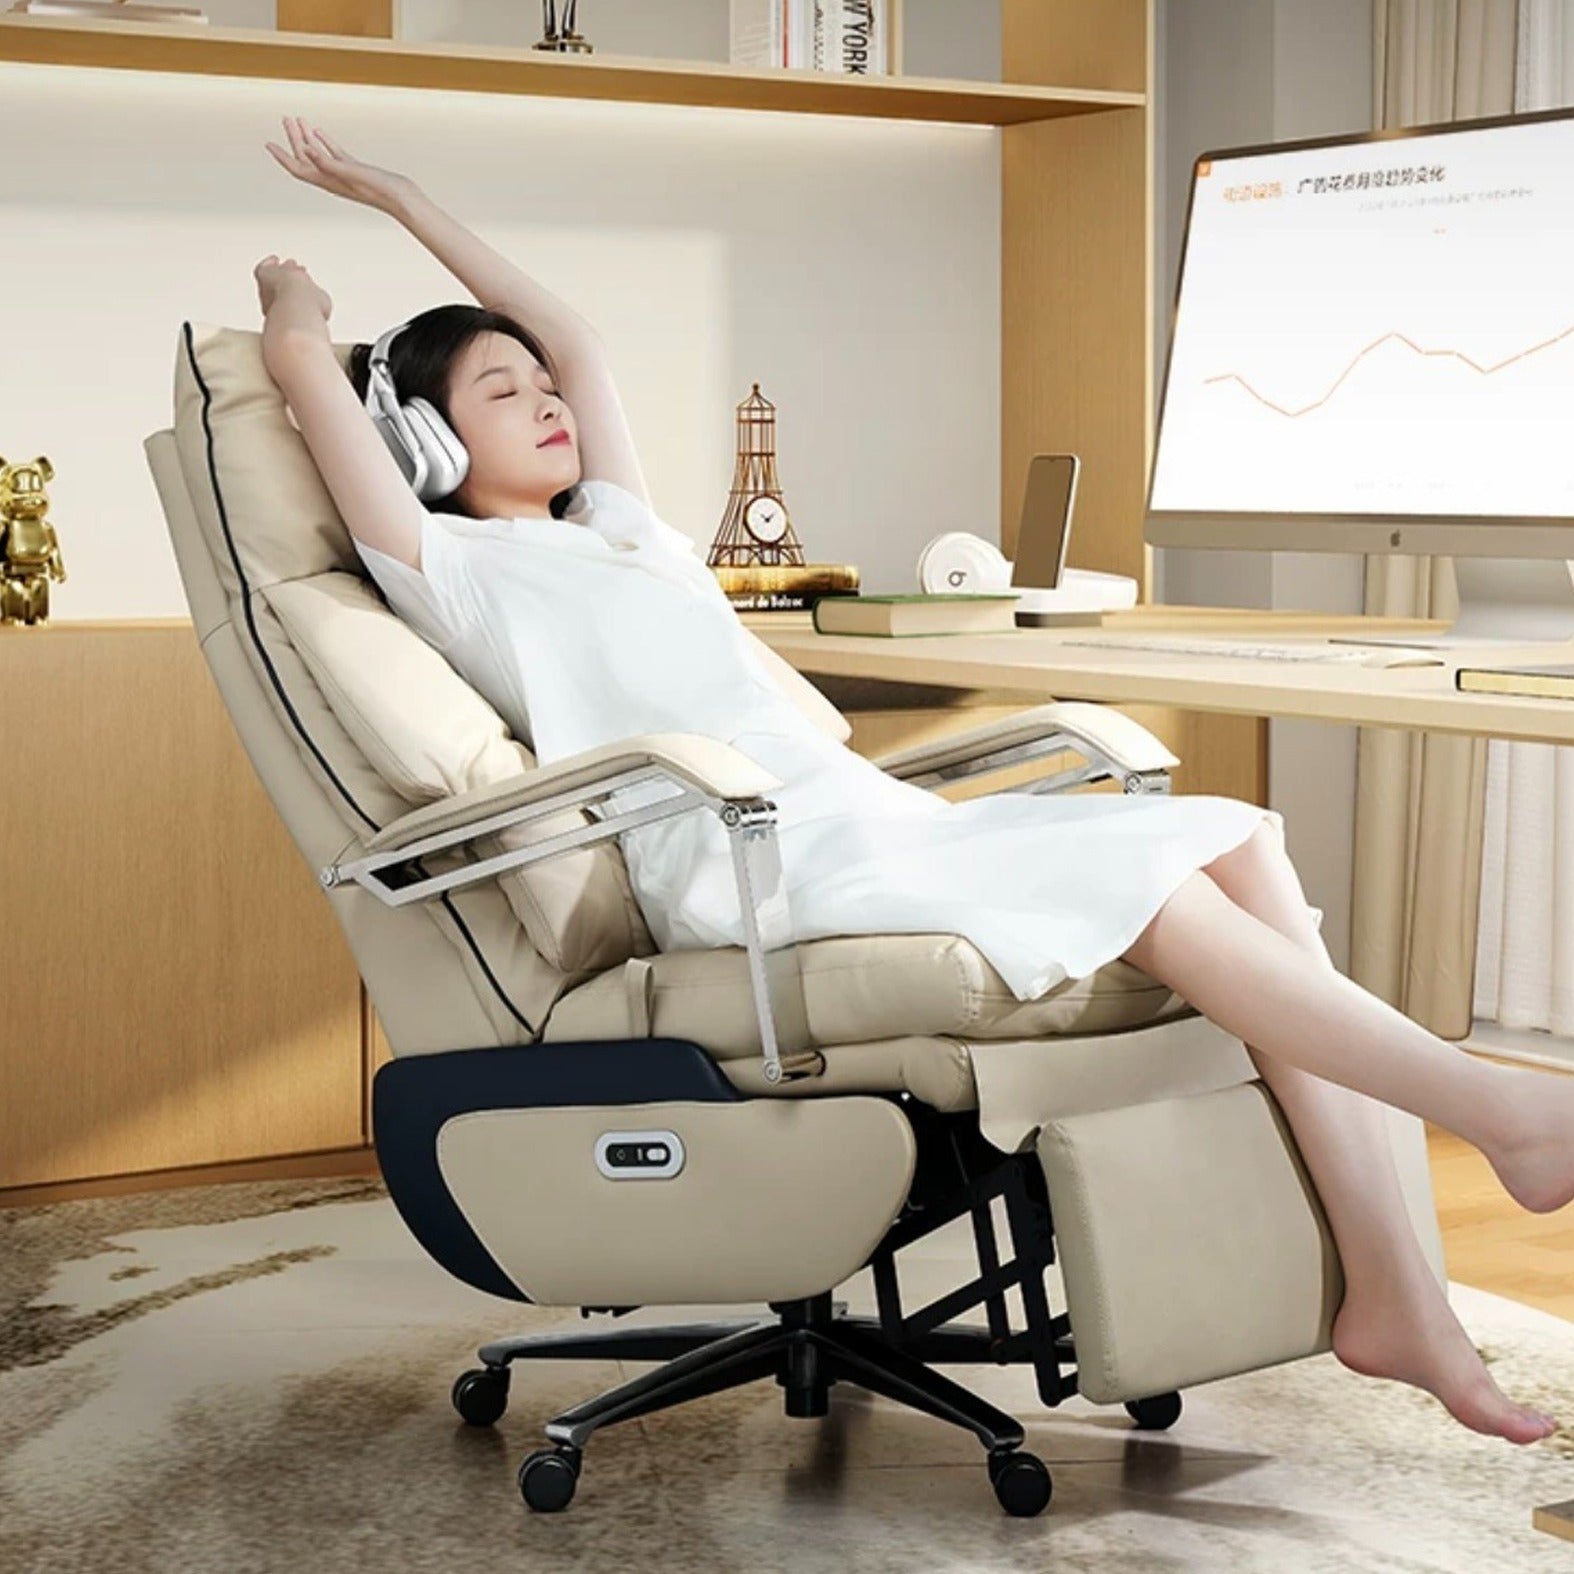 A person relaxing on an Adjustable Electric Office Chair situated in front of a PC and listening to music